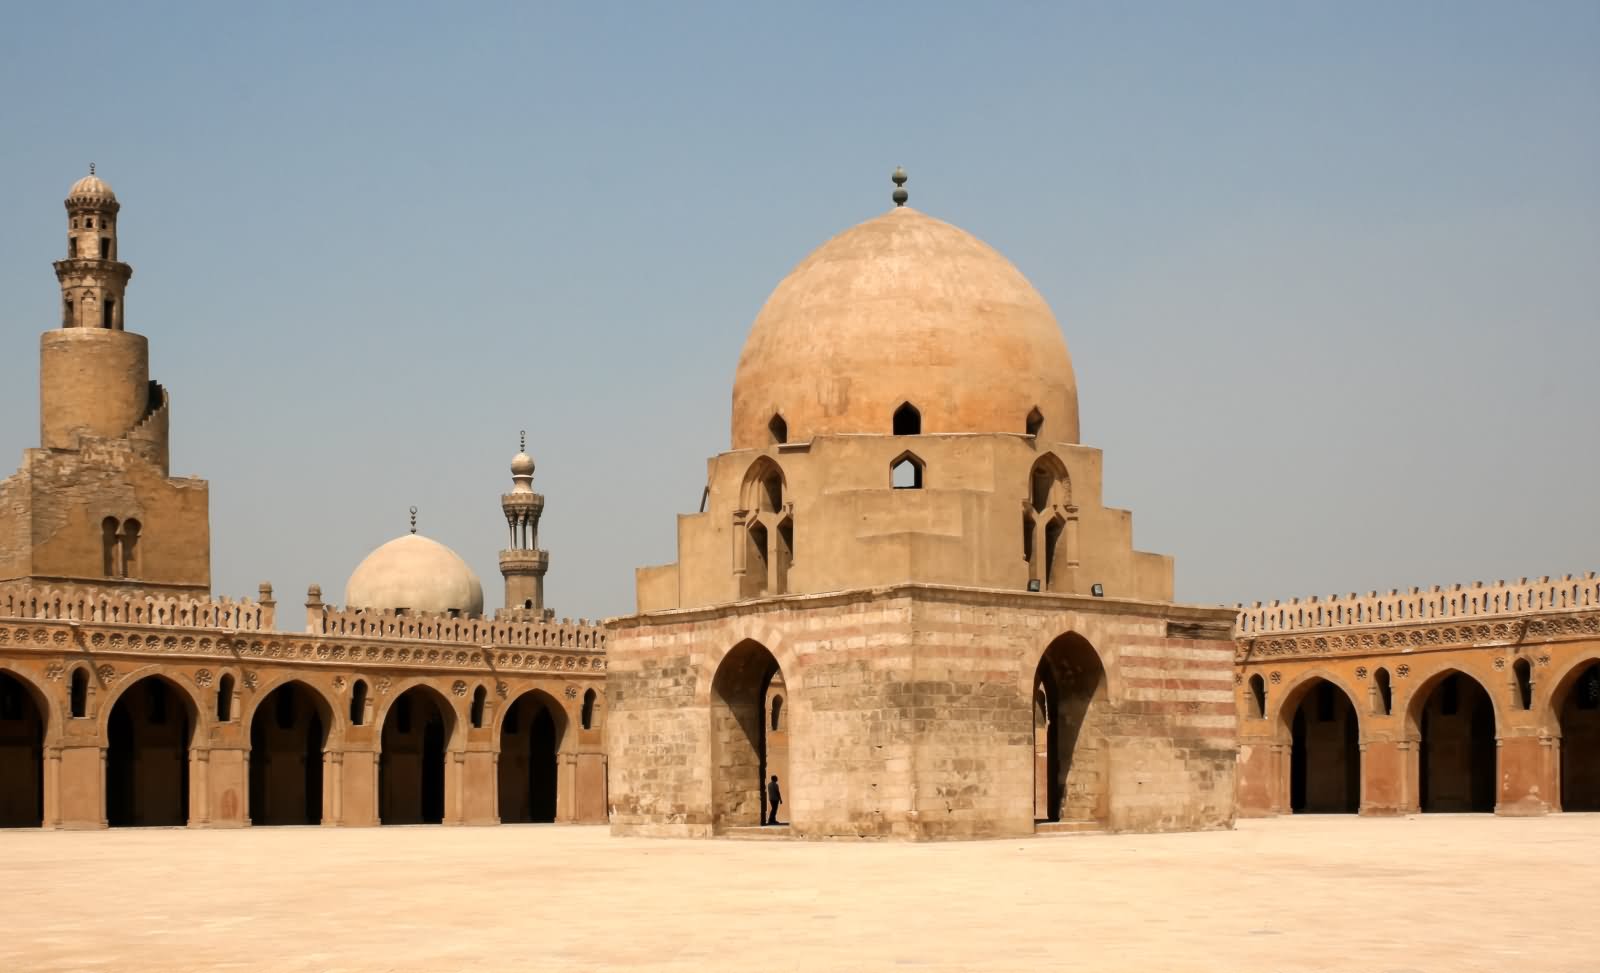 View Of Ablution Fountain And Spiral Minaret Of Ibn Tulun Mosque